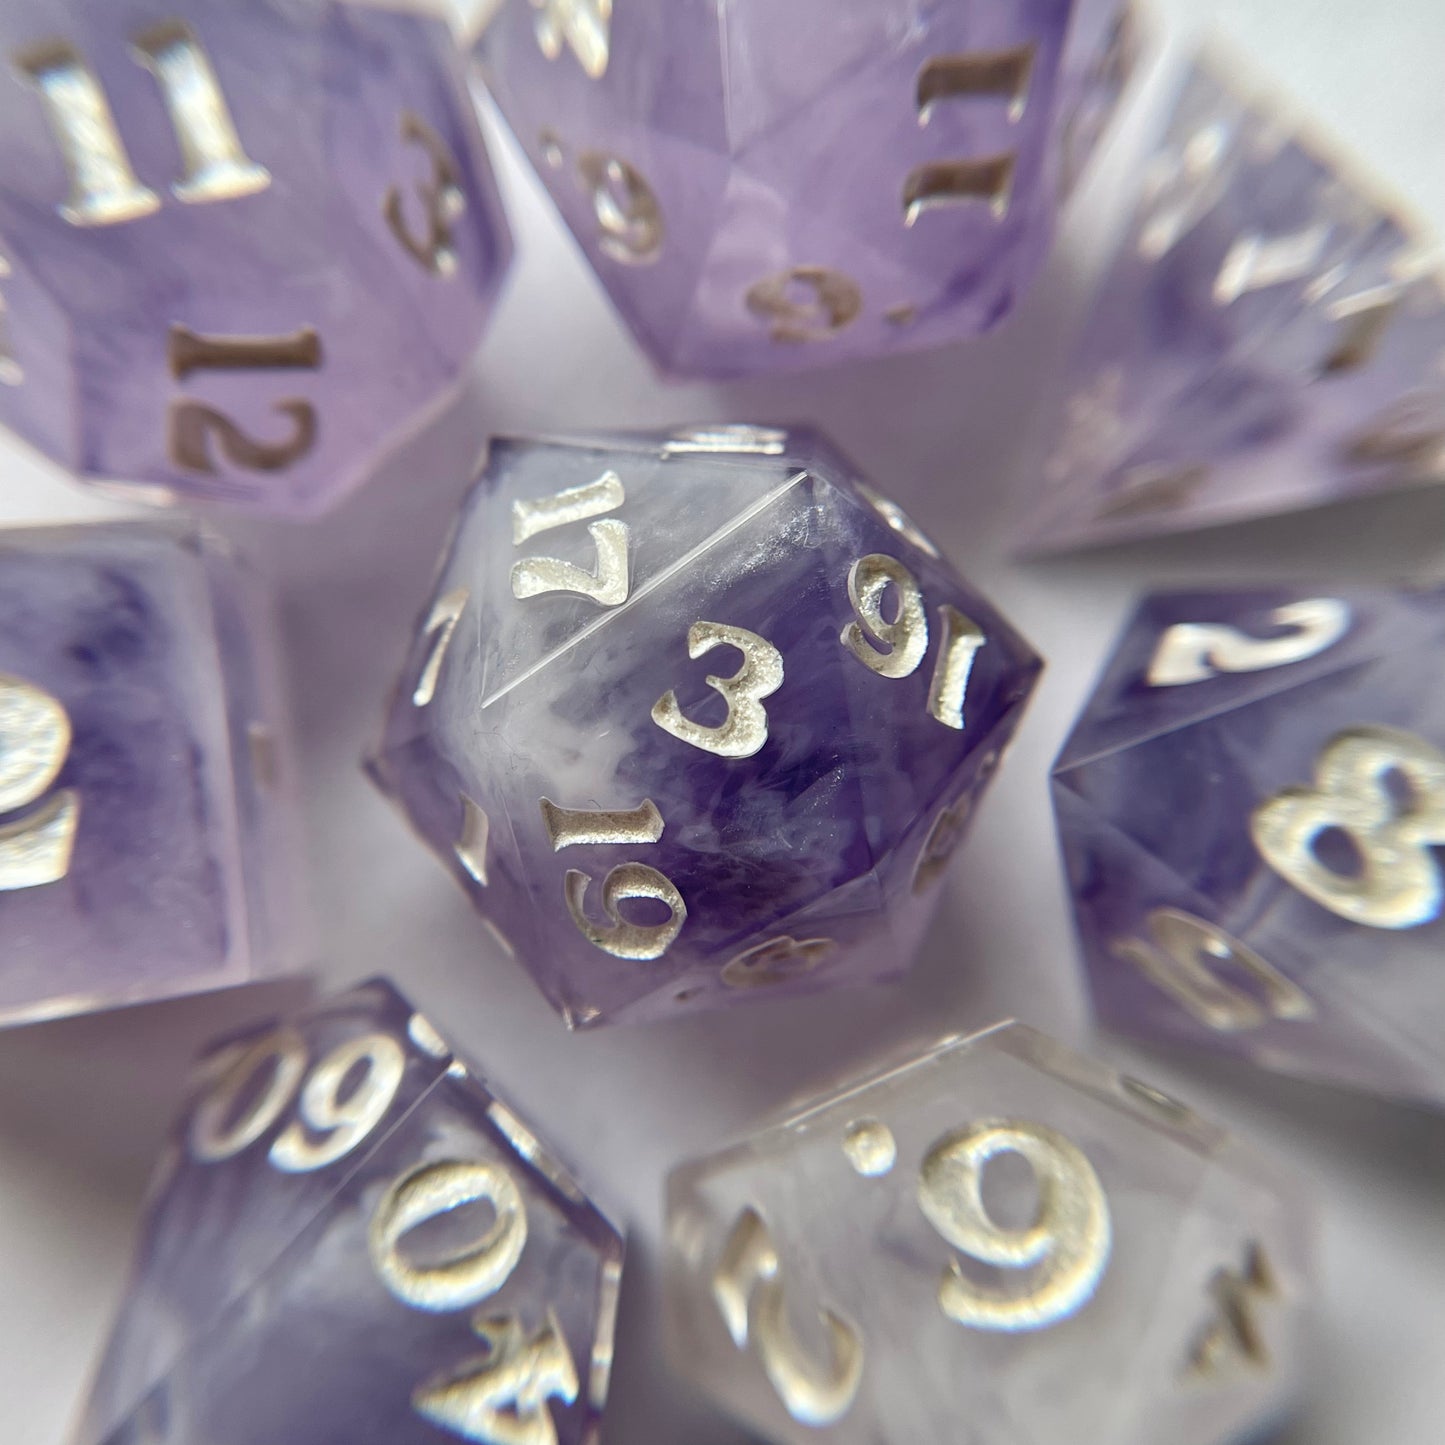 Kindred – 7-piece Polyhedral Dice Set